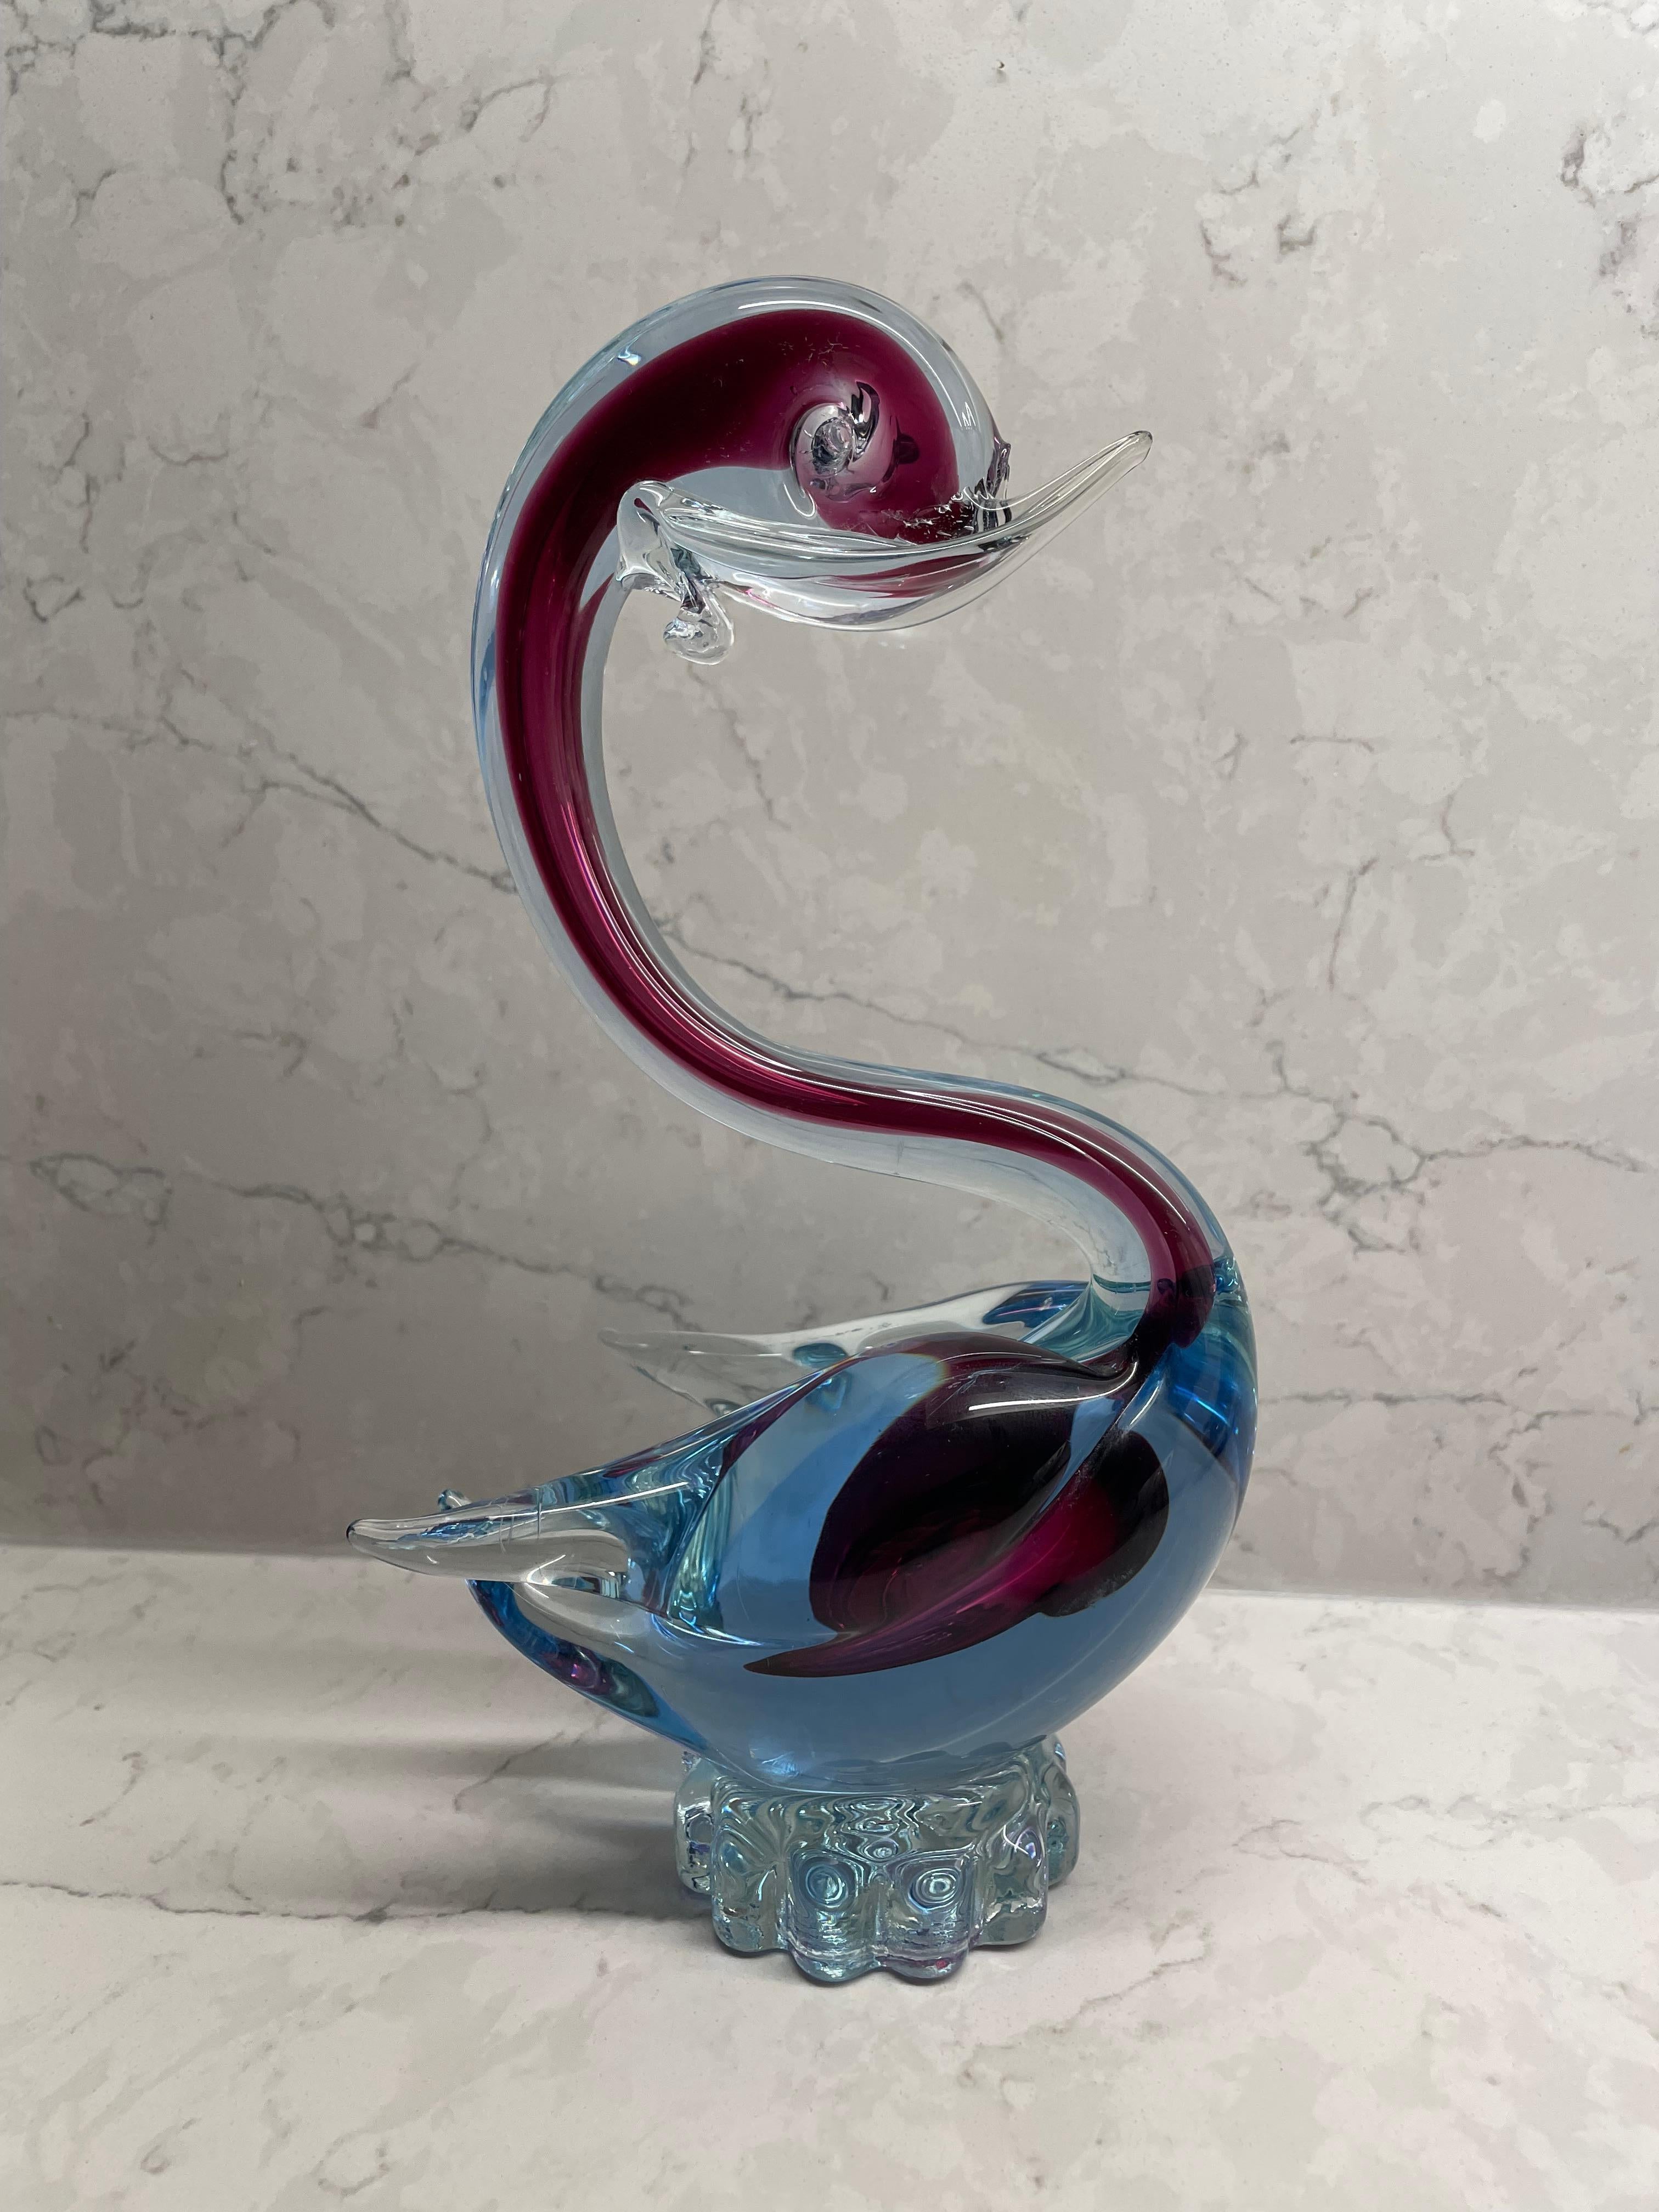 Stunning Murano Art glass swan bird figurine. This bird figurine was made using the sommerso technique and features purple and blue tones. “sommerso” which is Italian meaning “submerged”. The Sommerso technique is used to form multiple layers of